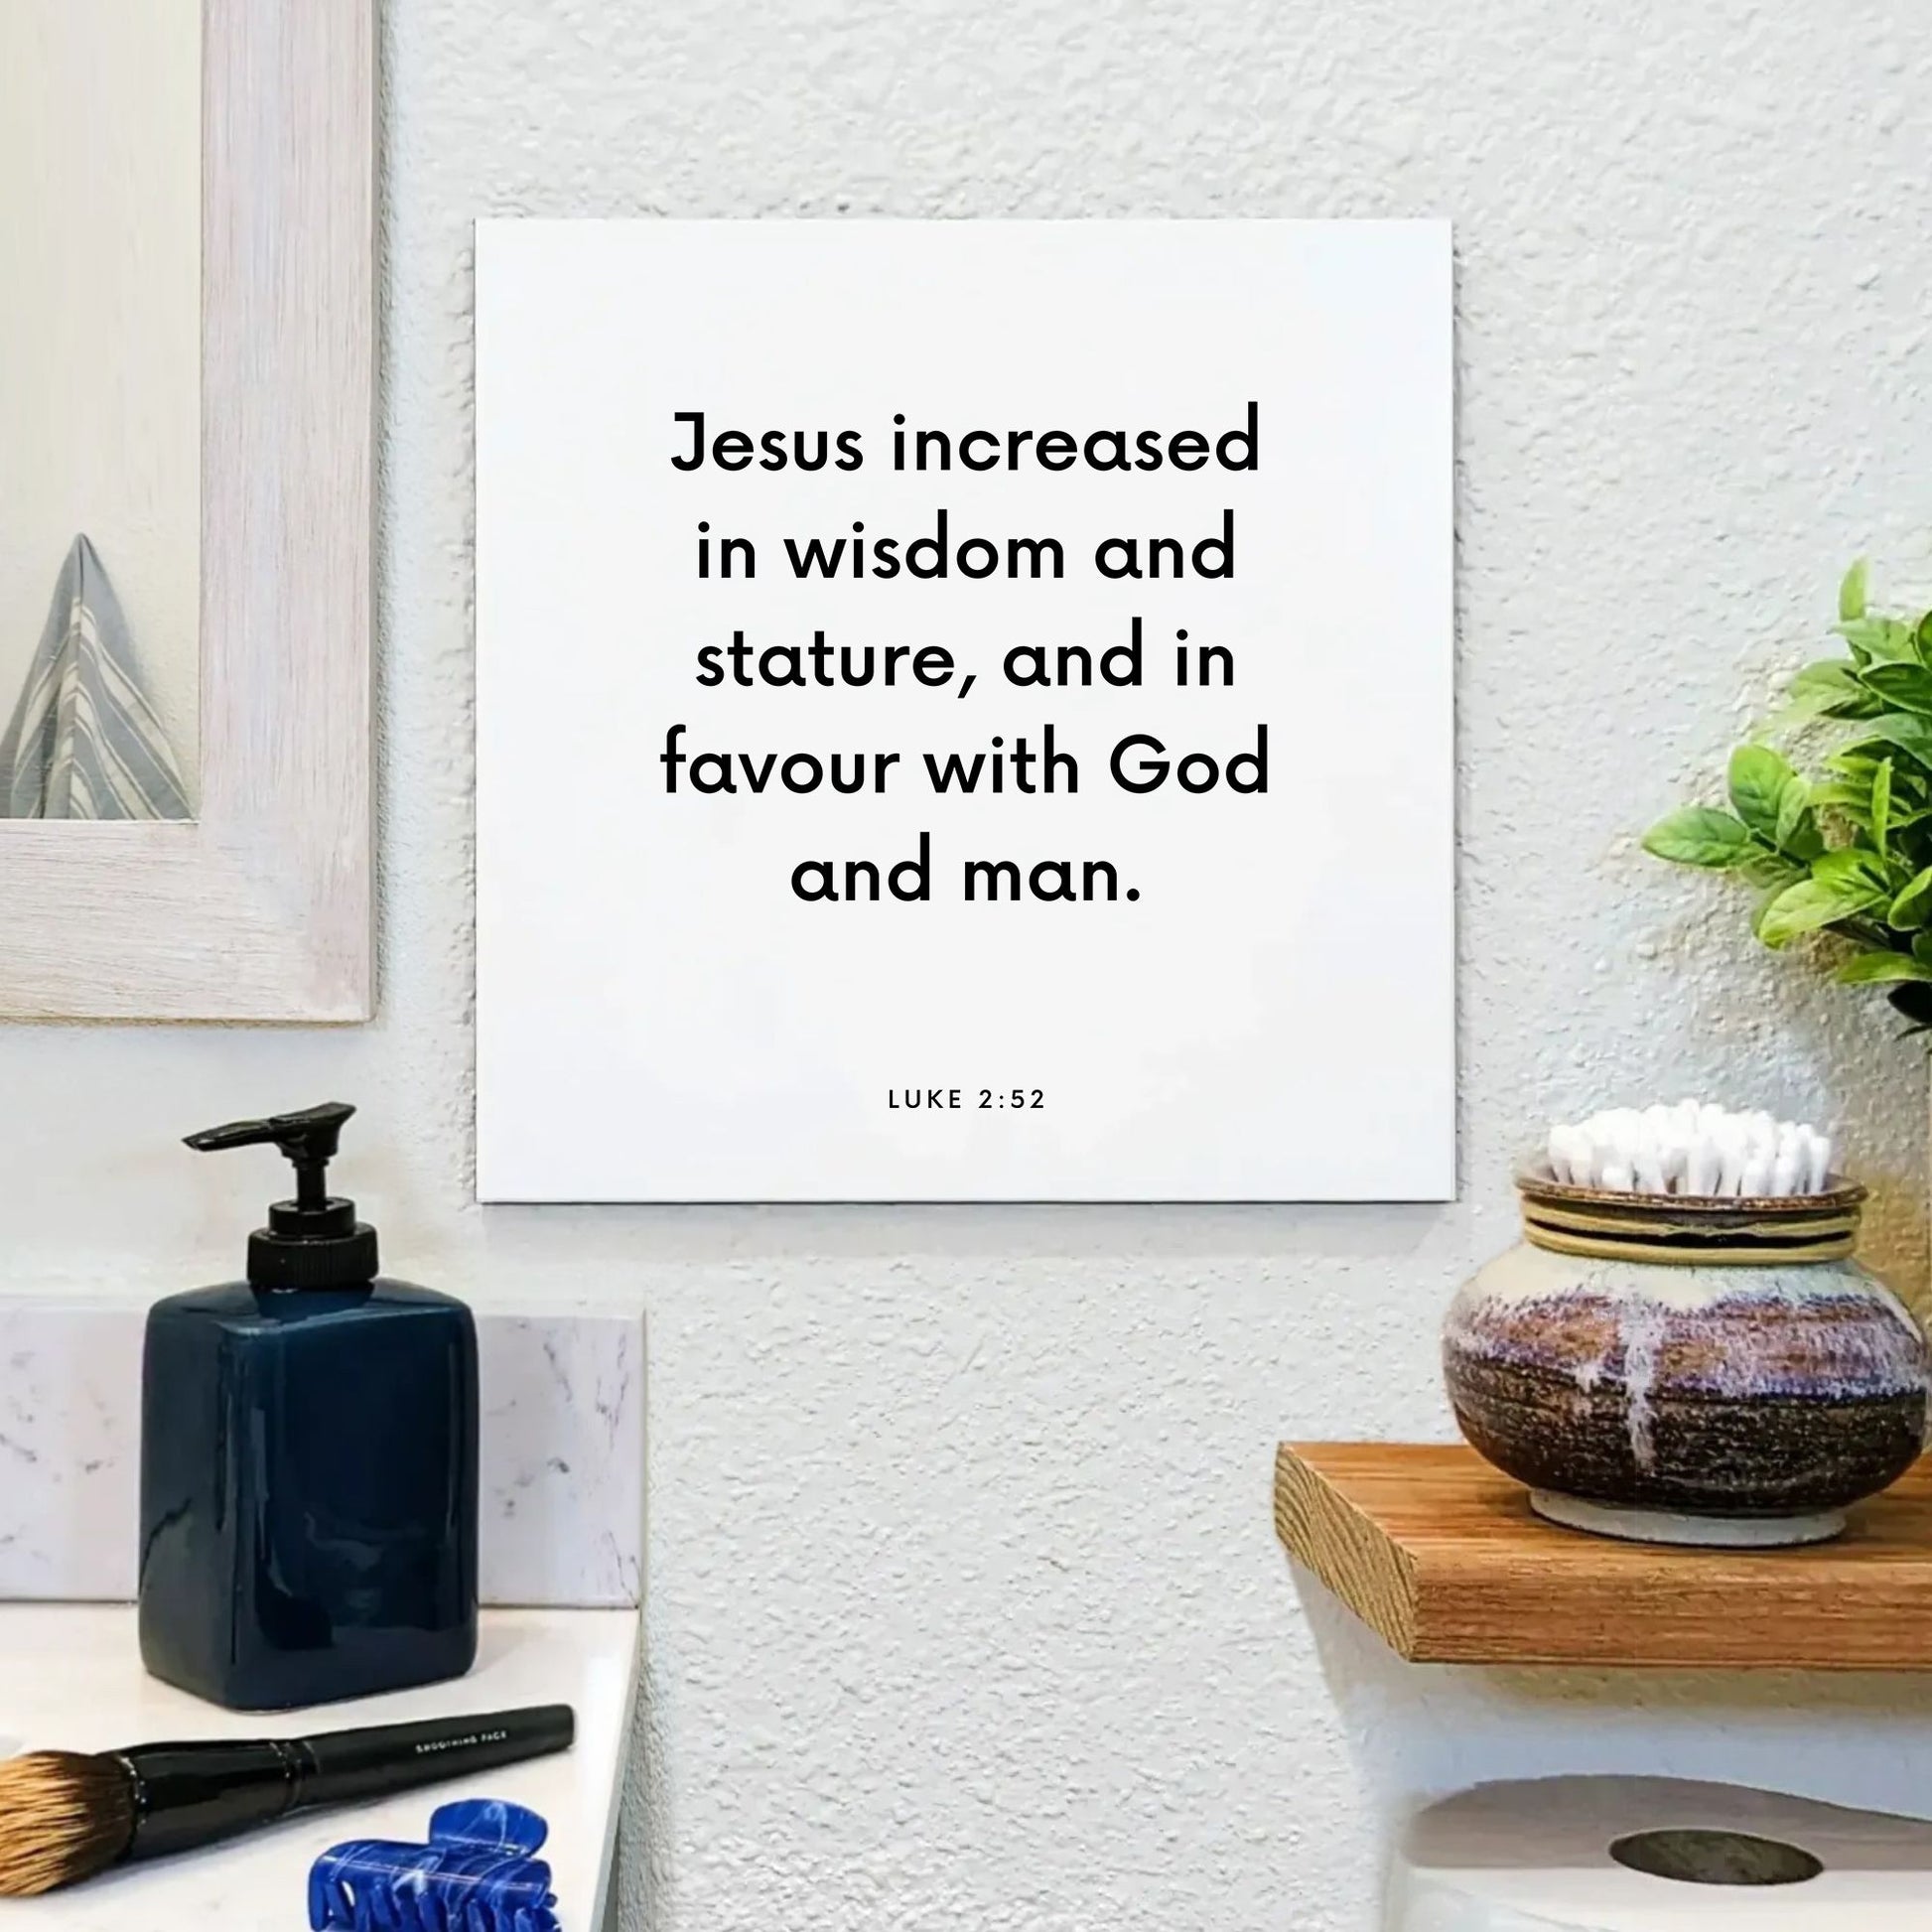 Bathroom mouting of the scripture tile for Luke 2:52 - "Jesus increased in wisdom and stature"